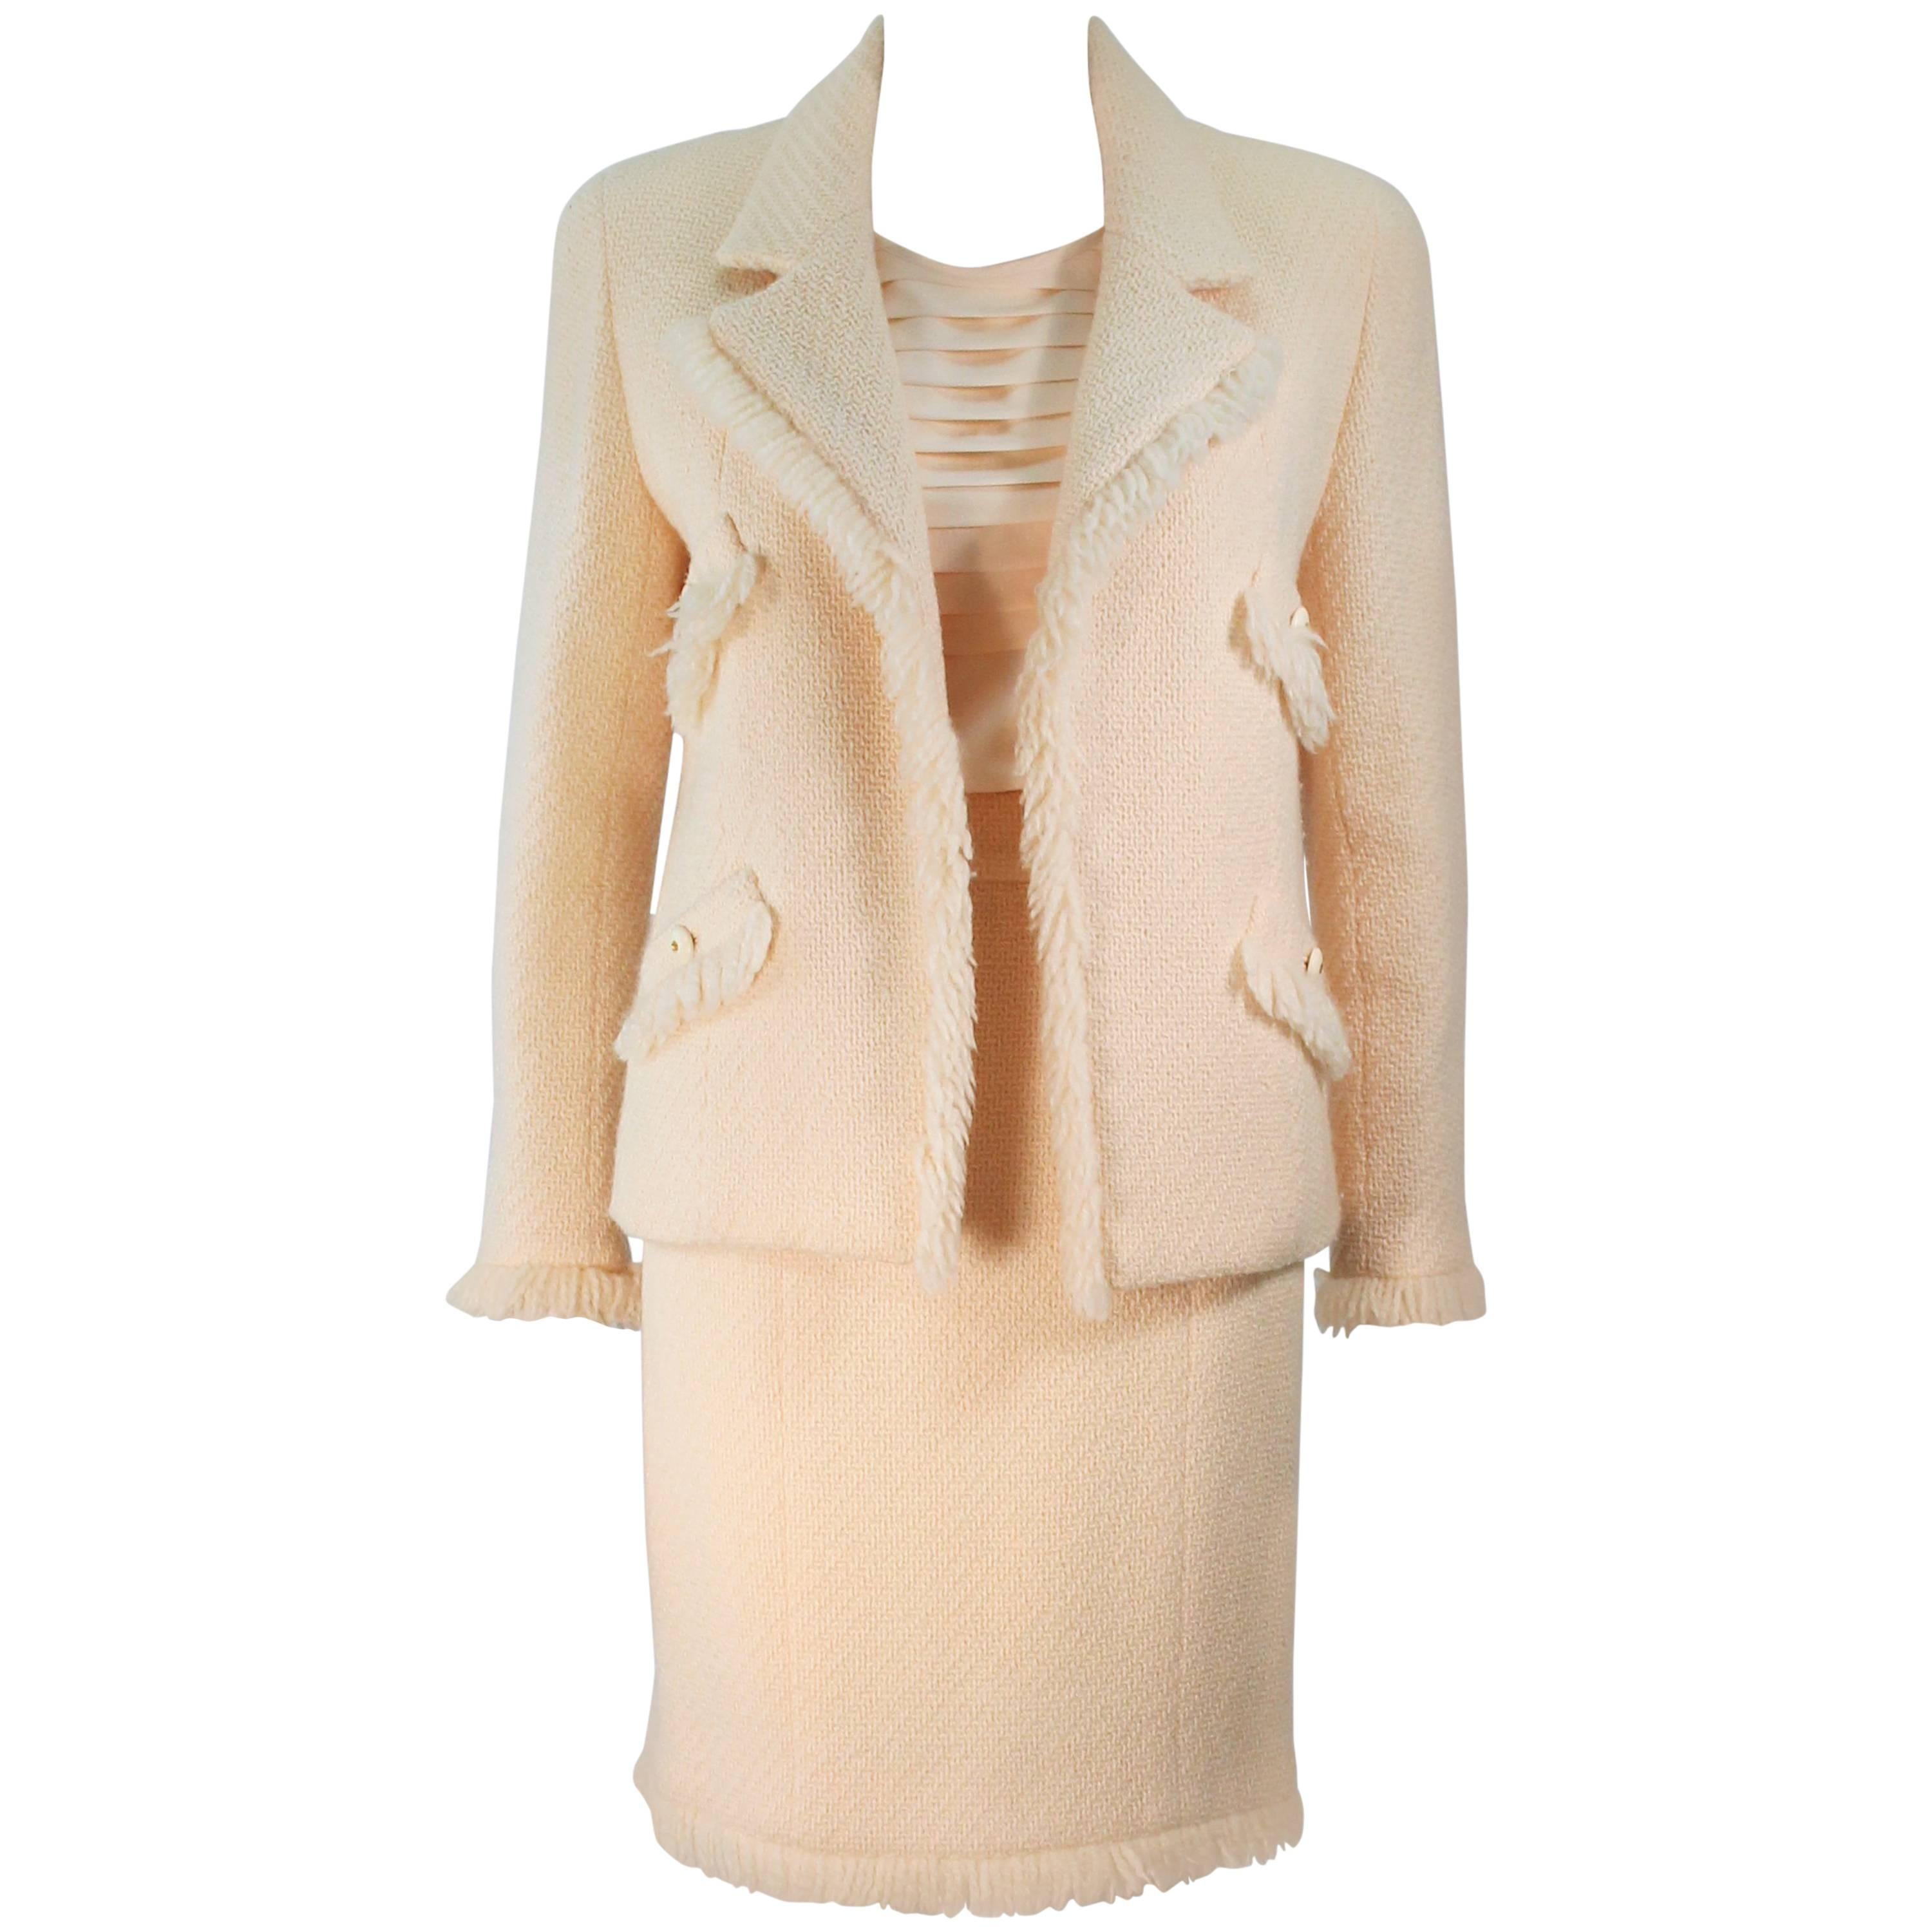 CHANEL Cream Wool 3pc Skirt Suit with Fringe Trim and Gold Hardware Size 38